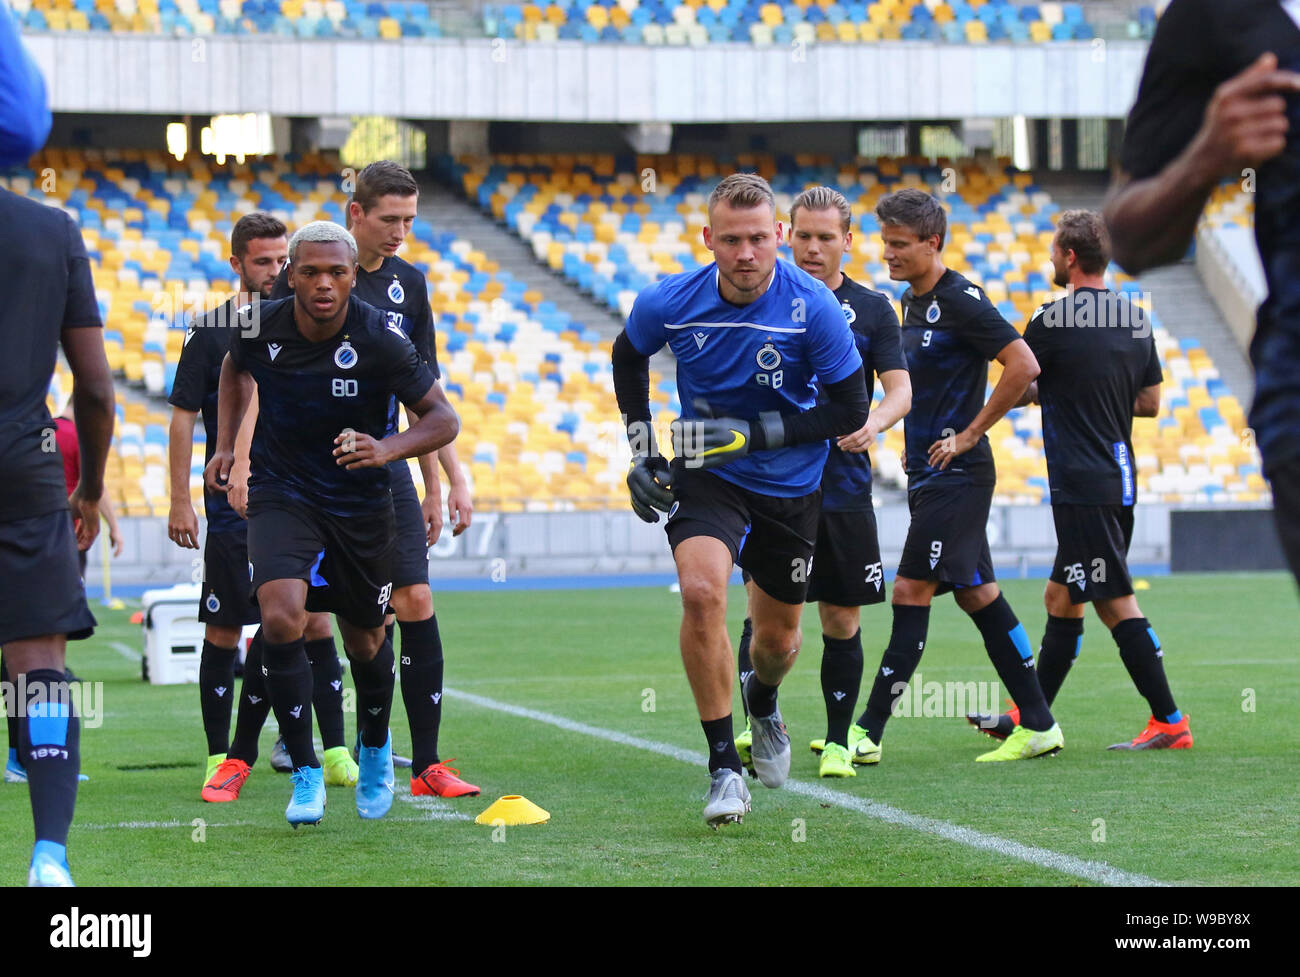 Kyiv, Ukraine. 12th August, 2019. Lois Openda and Simon Mignolet of Club Brugge in action during the training session before the UEFA Champions League 3rd qualifying round game against FC Dynamo Kyiv at NSC Olimpiyskyi stadium in Kyiv, Ukraine. Credit: Oleksandr Prykhodko/Alamy Live News Stock Photo